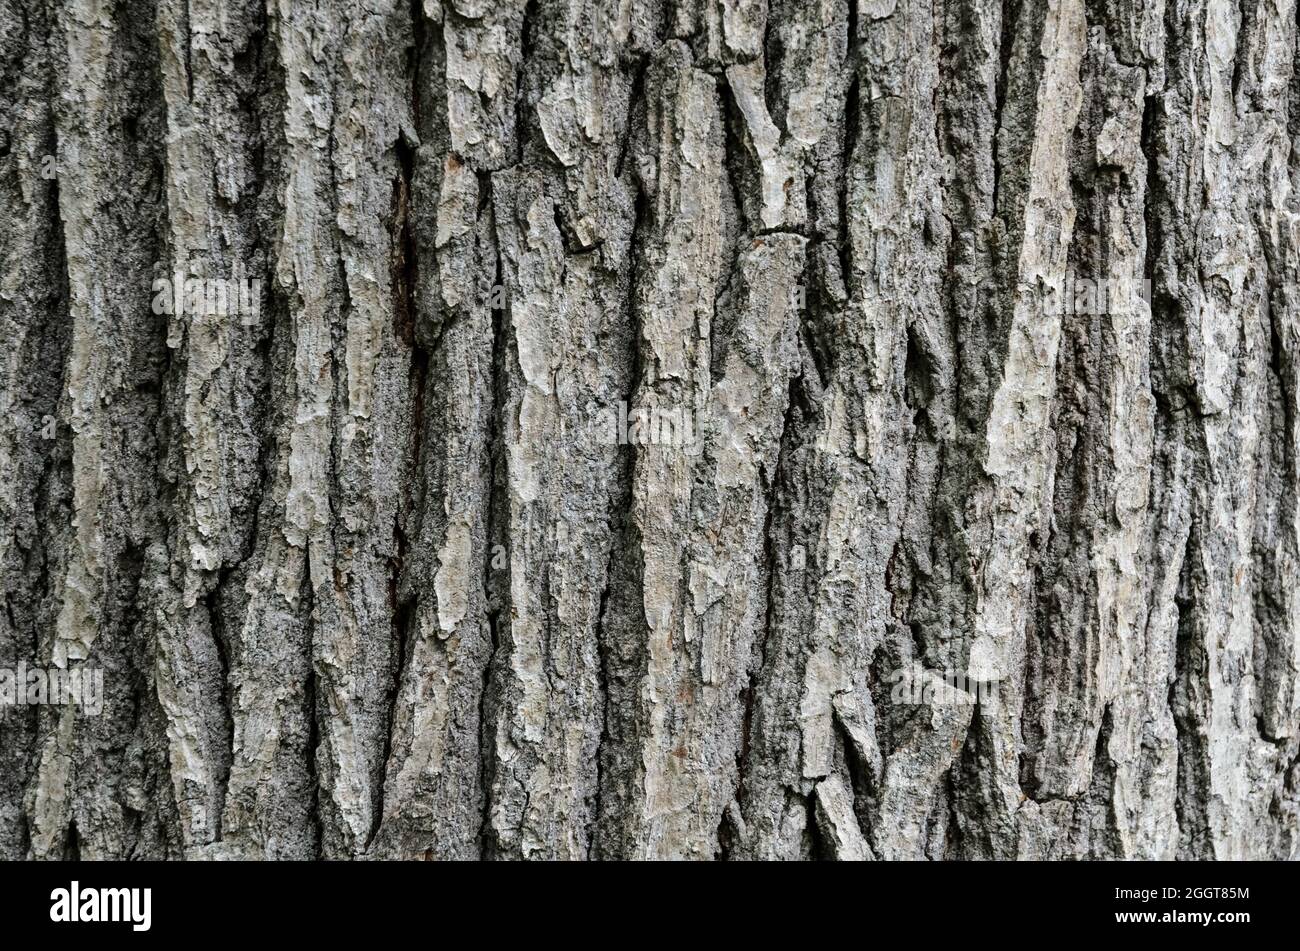 Close-up view of weathered outer bark of an oak tree (Quercus) with different layers, cracks and lines, abstract natural texture or background Stock Photo